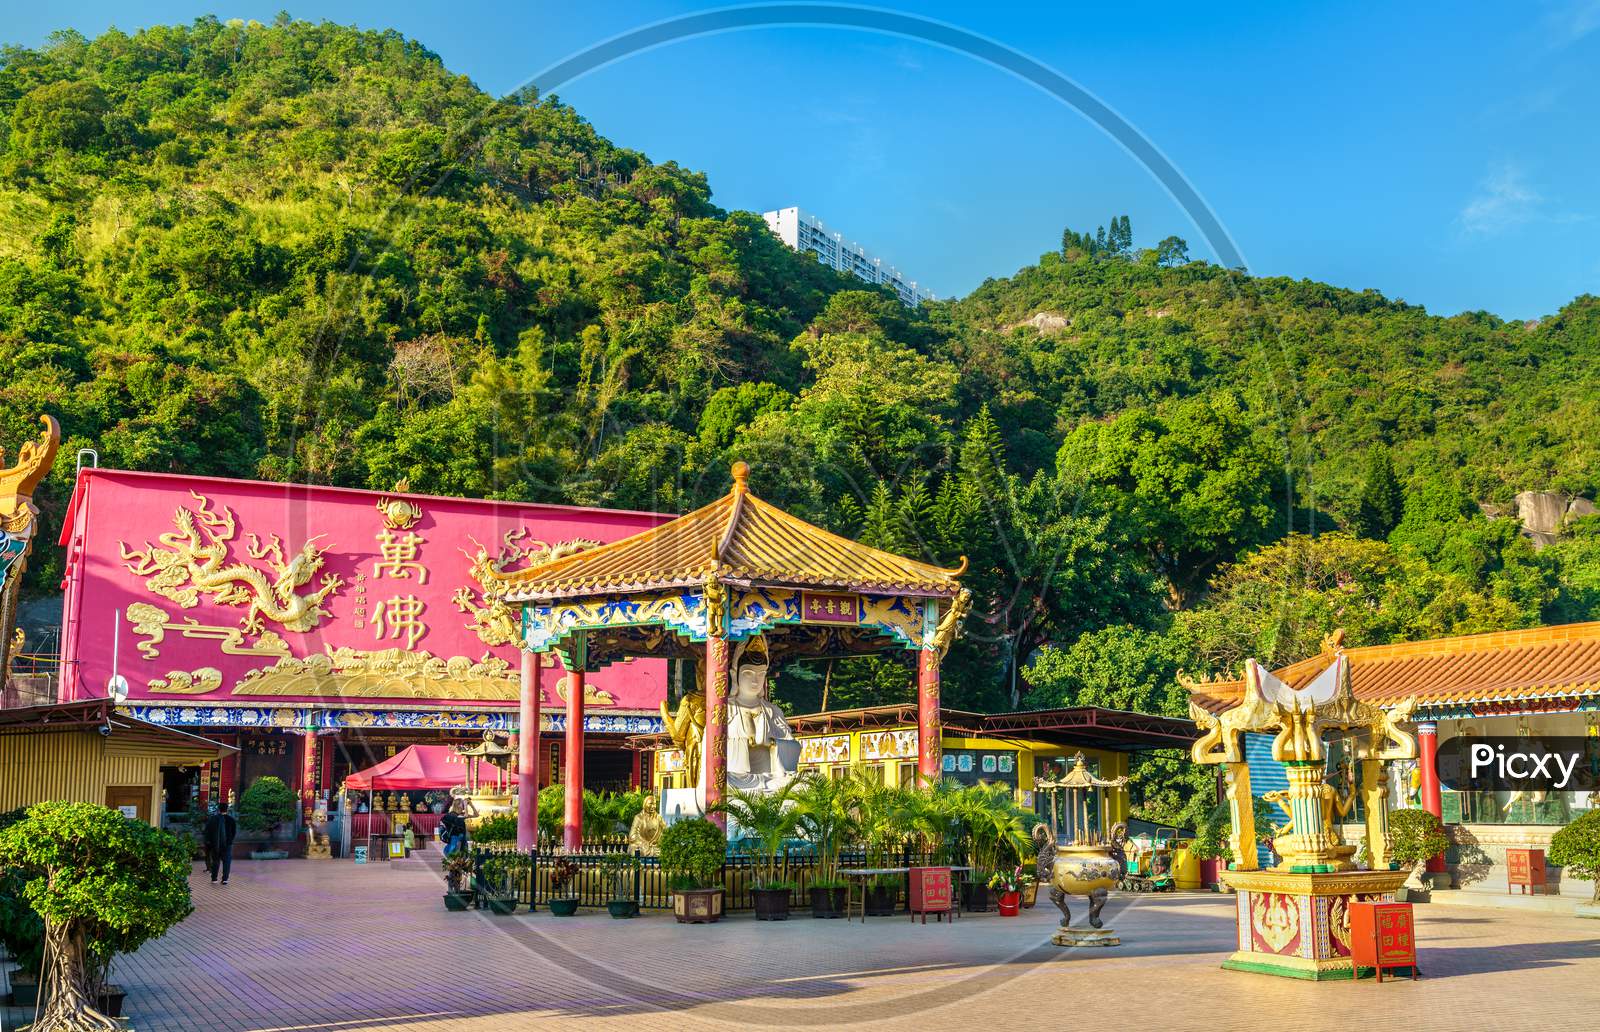 Pavilion At The Ten Thousand Buddhas Monastery In Hong Kong